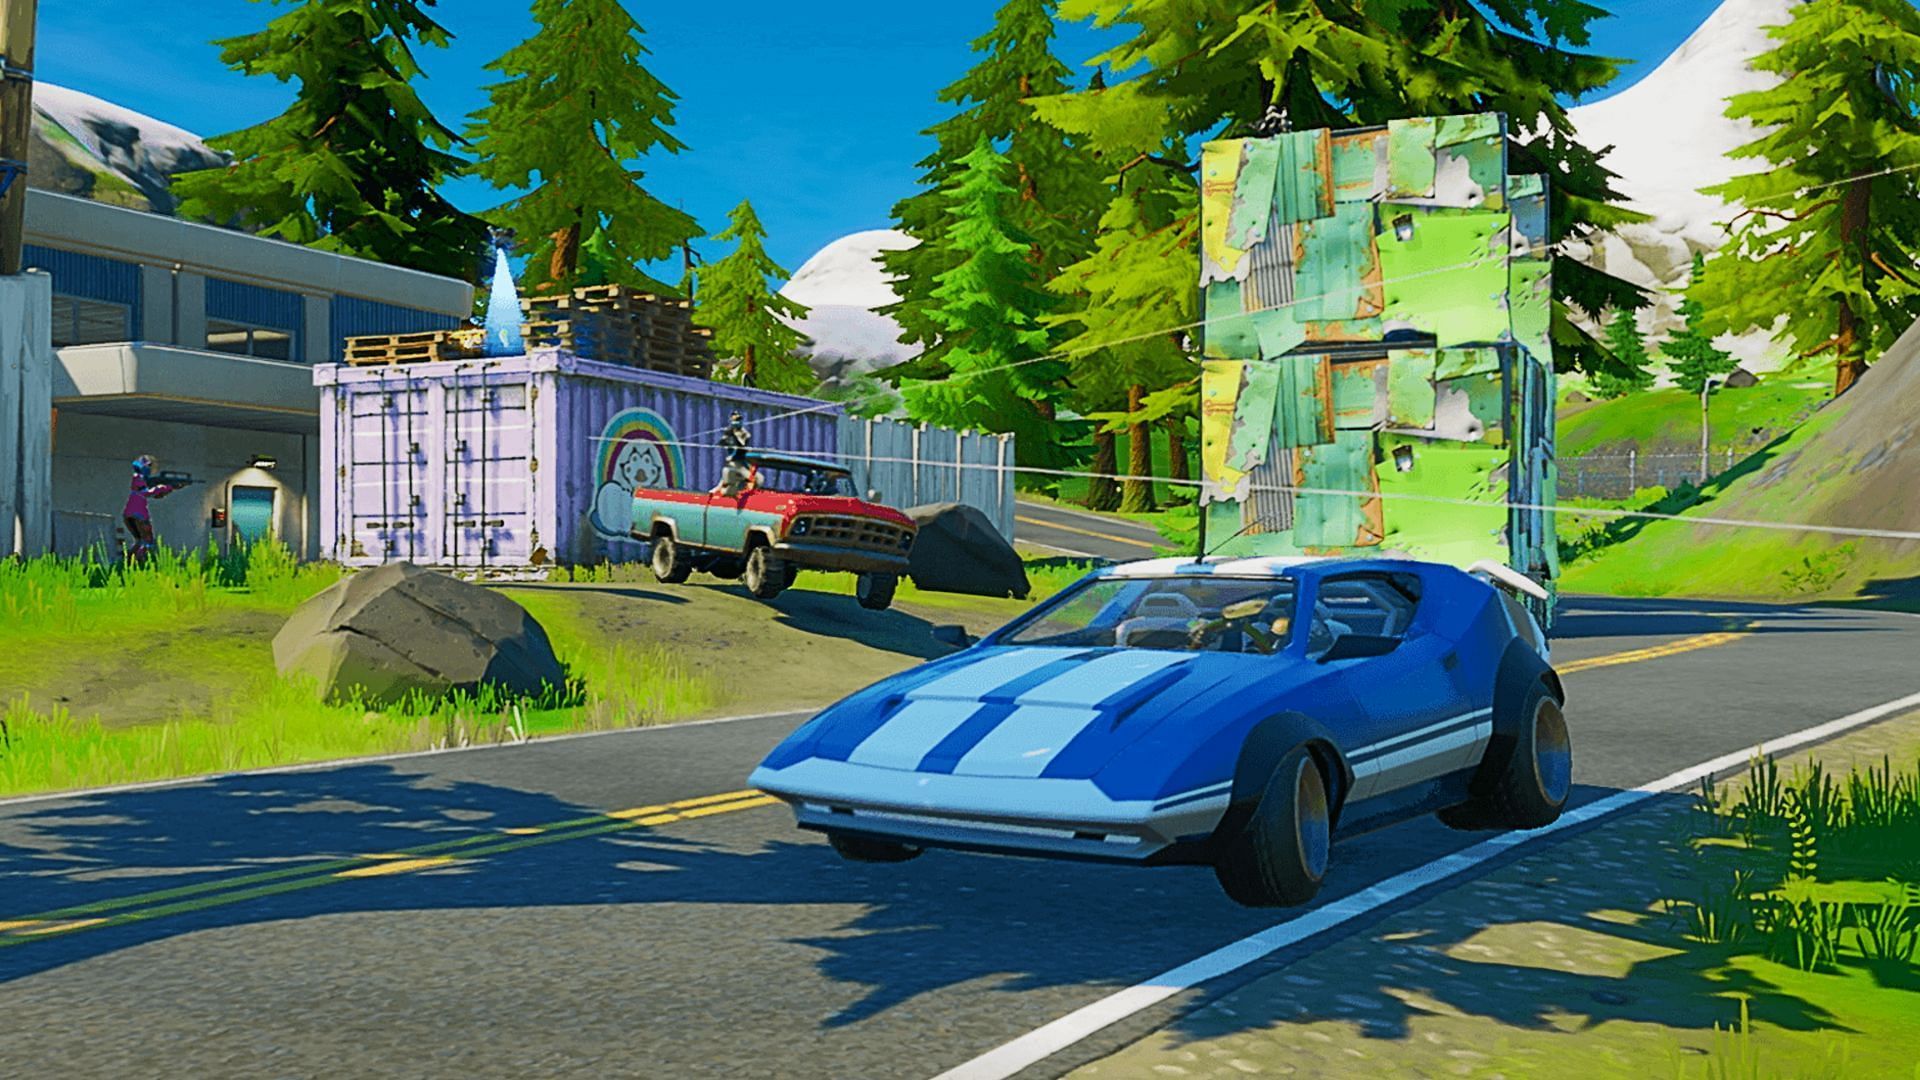 Over-powered car feature added in Fortnite secretly (Image via Epic Games)